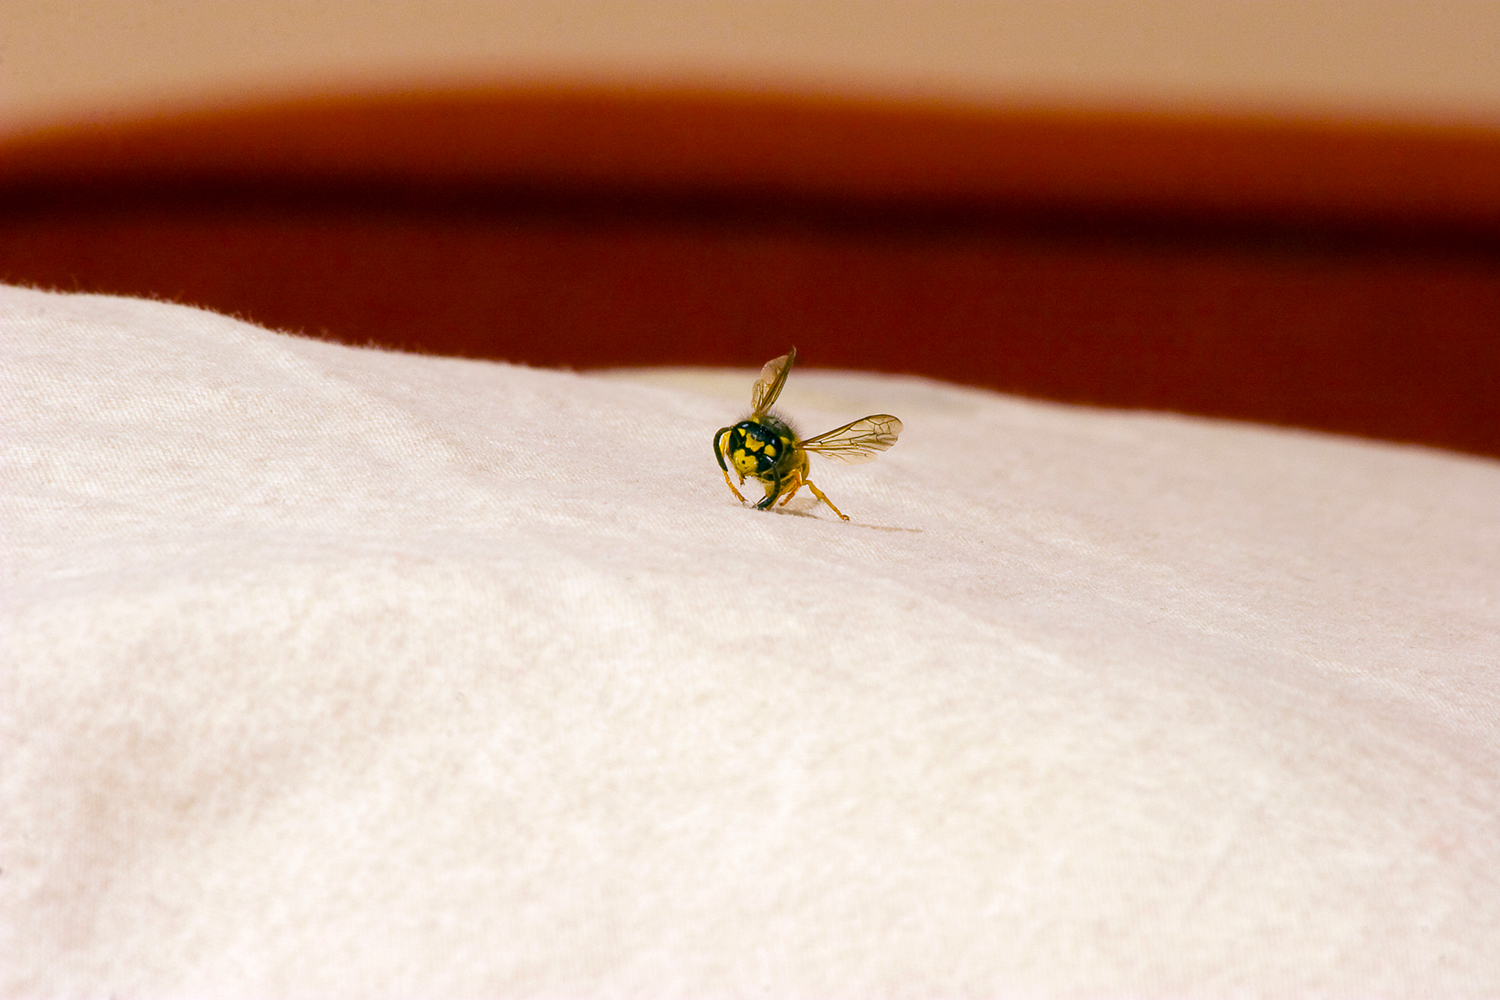 Close Up of a Wasp on Pillow